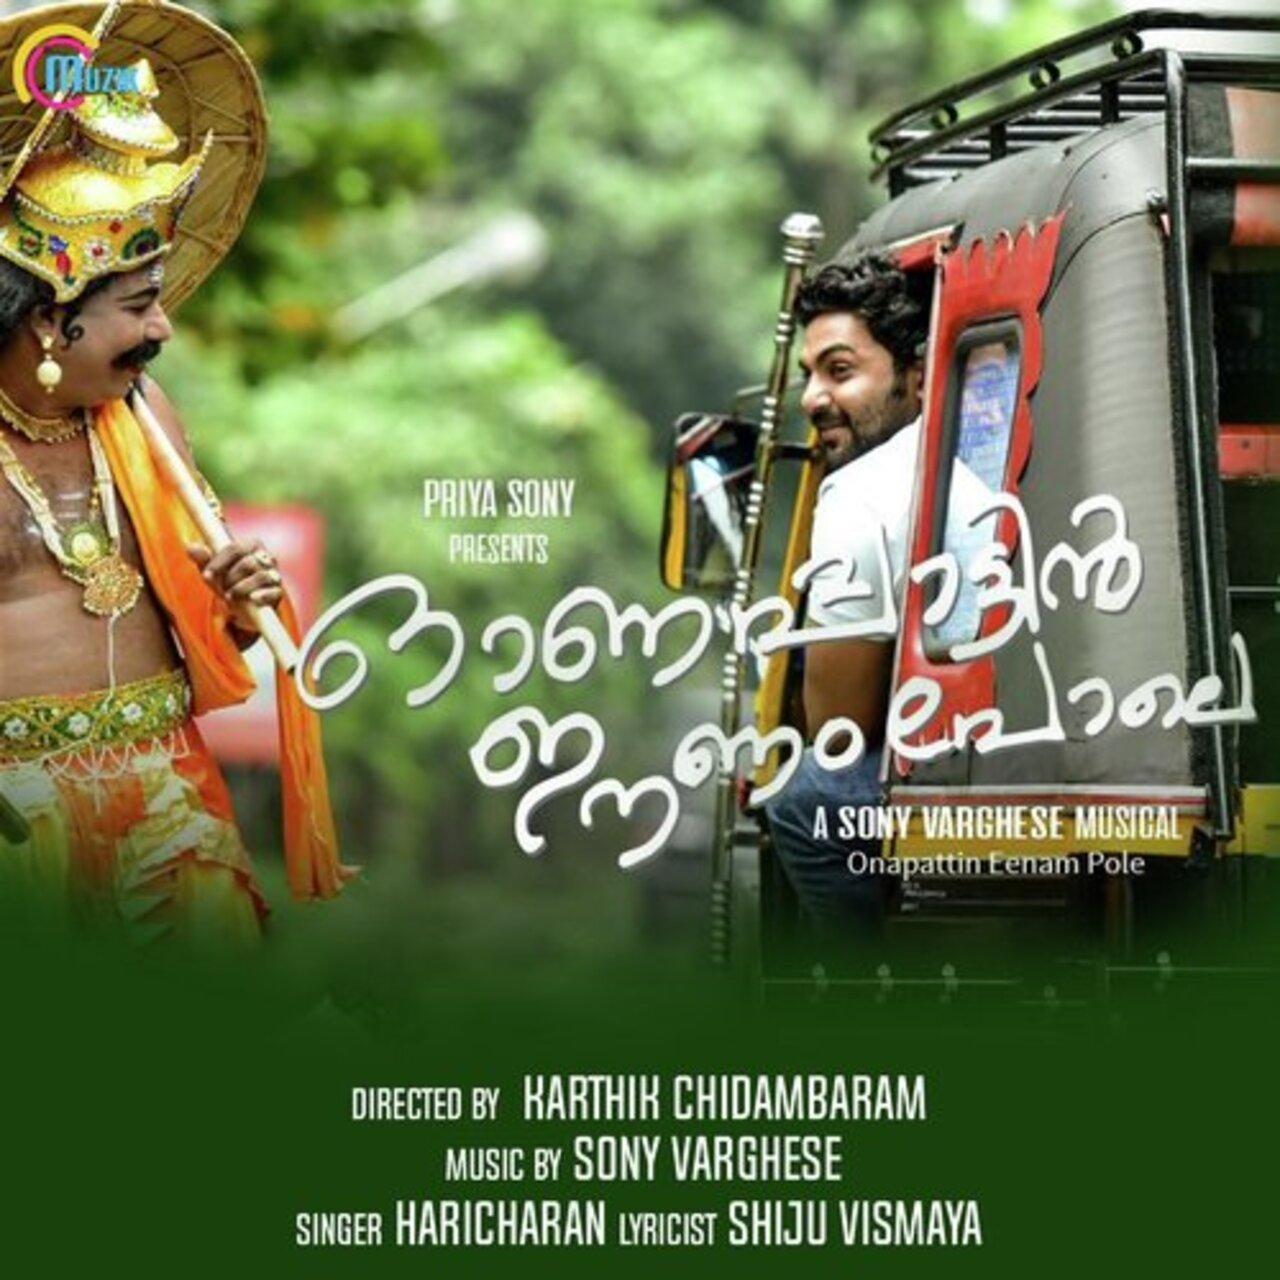 'Onappattin Eenam Pole' is a Malayalam song known for its melodious tune and poetic lyrics, capturing the essence of a festive mood